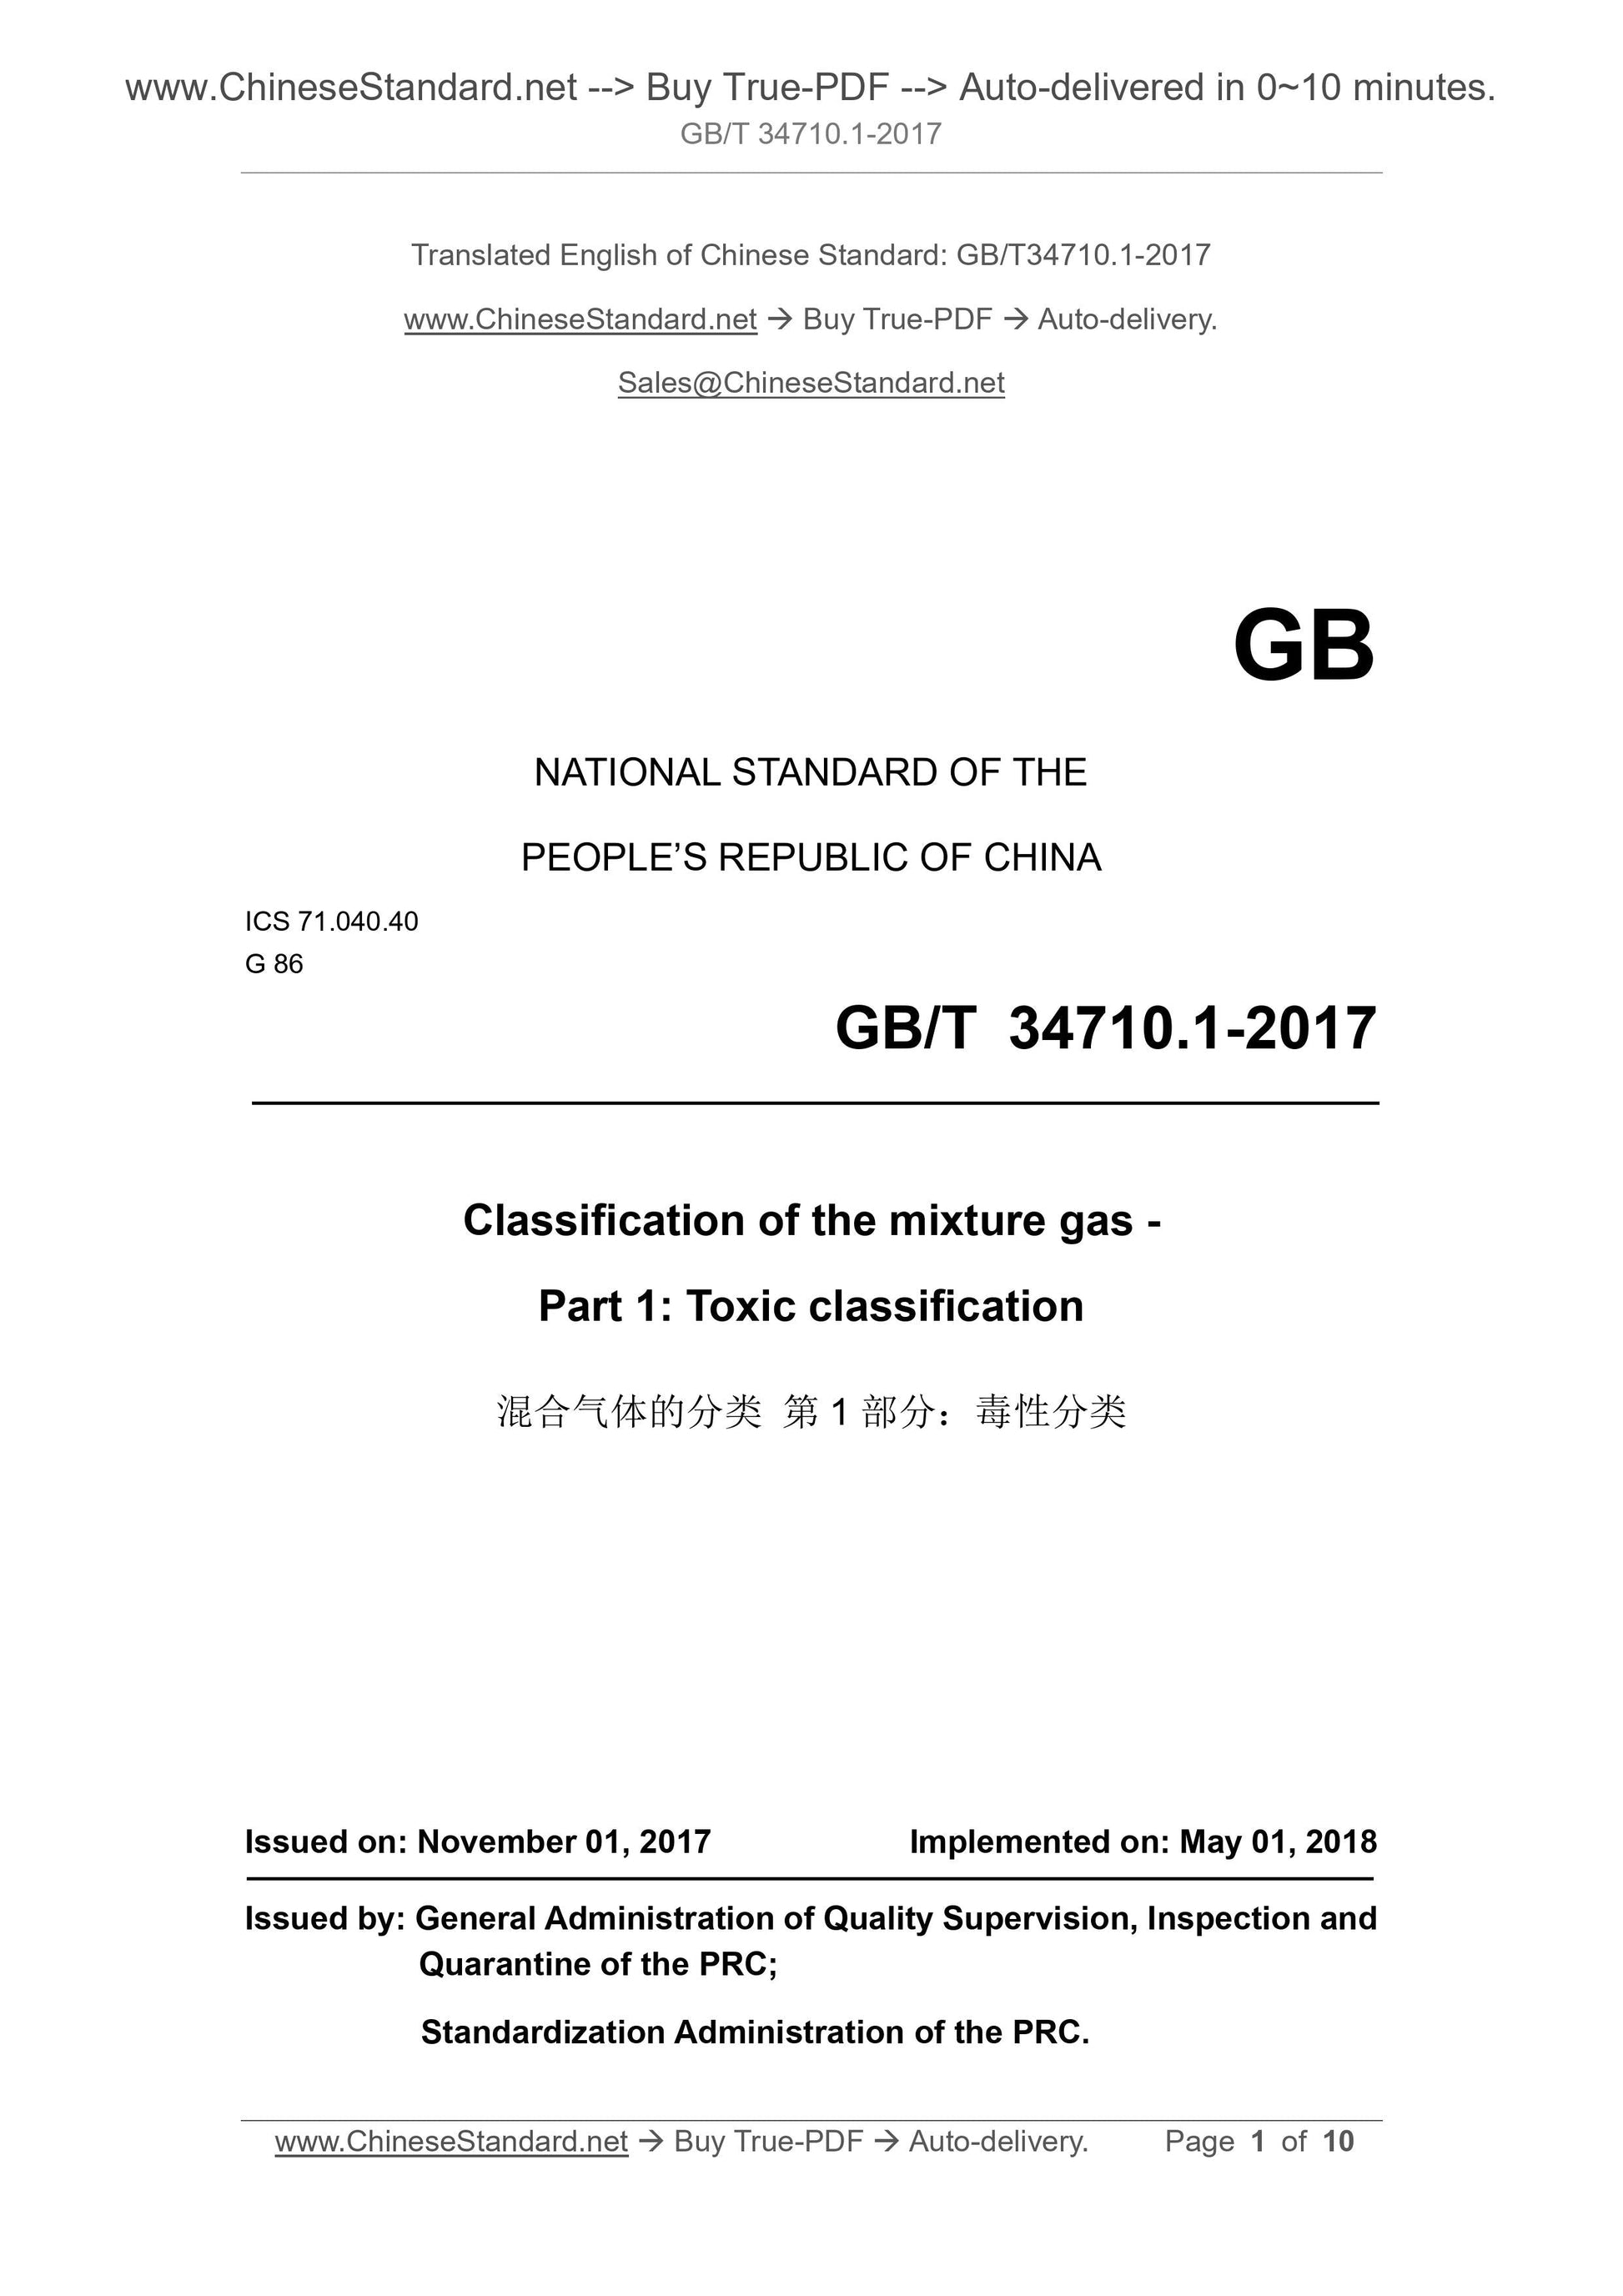 GB/T 34710.1-2017 Page 1